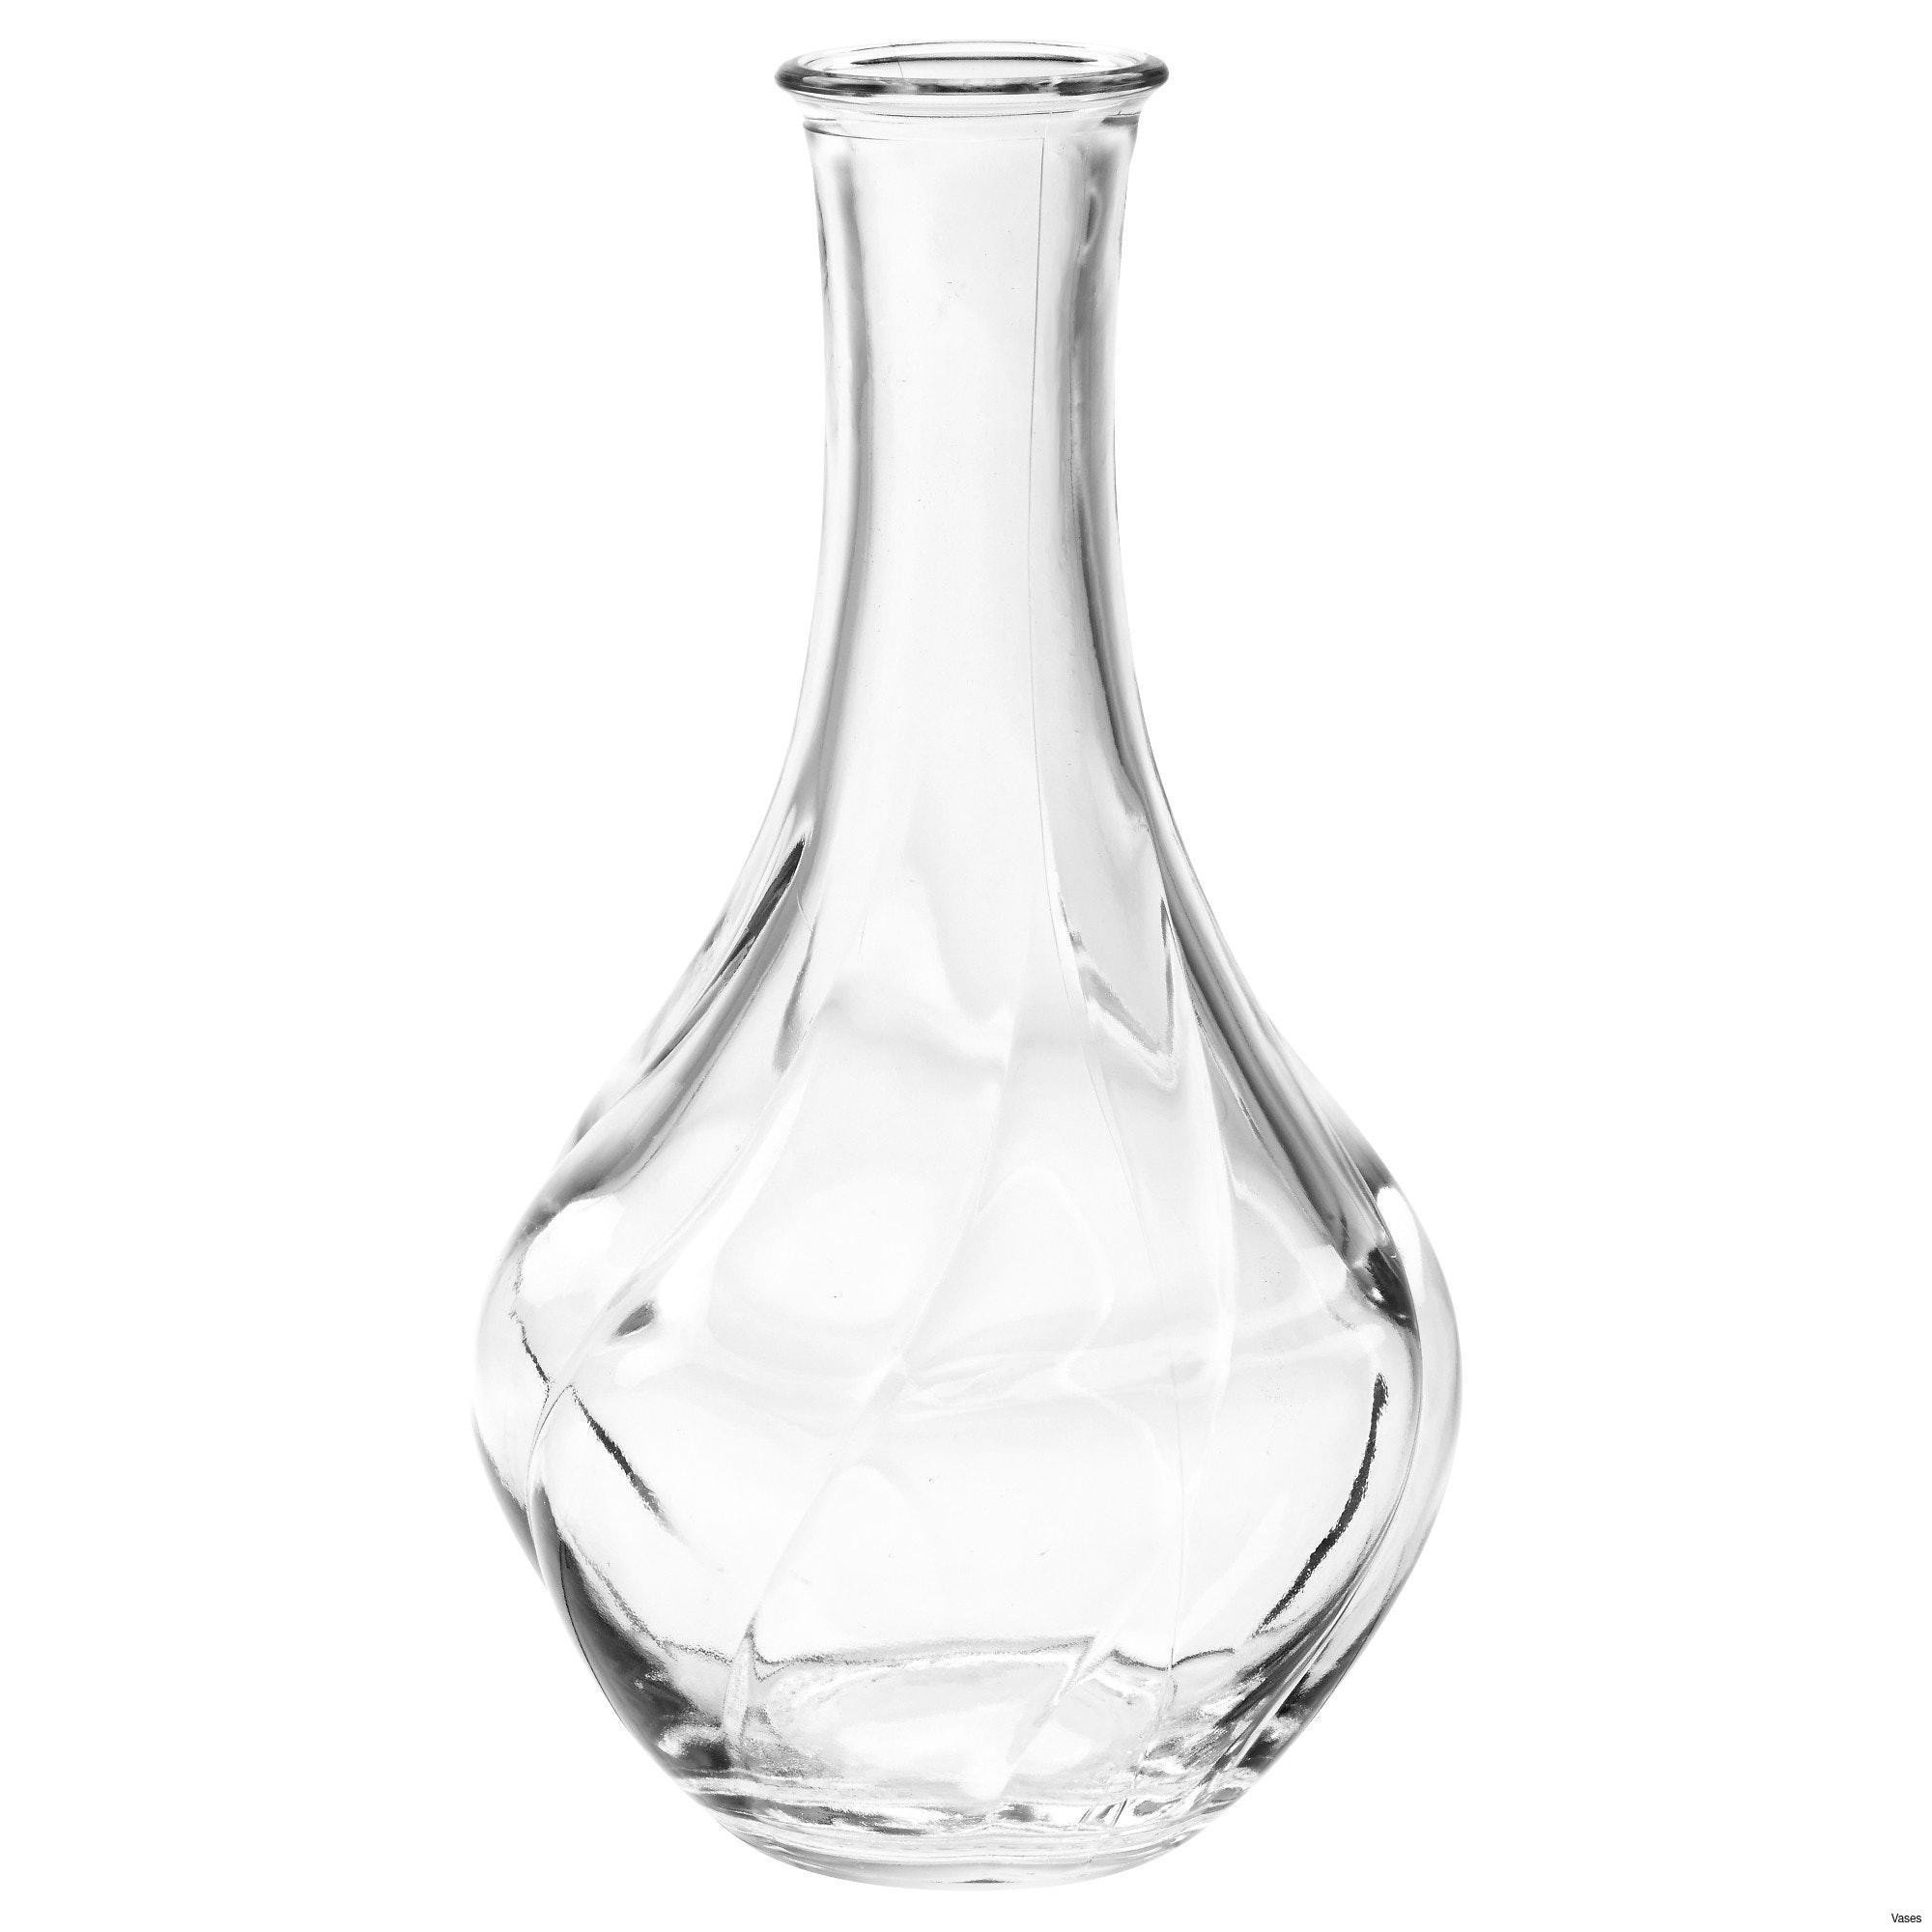 13 Elegant Clear Vase with Lid 2024 free download clear vase with lid of glass vases with lids image living room glass vases fresh clear vase inside glass vases with lids image living room glass vases fresh clear vase 0d tags amazing and